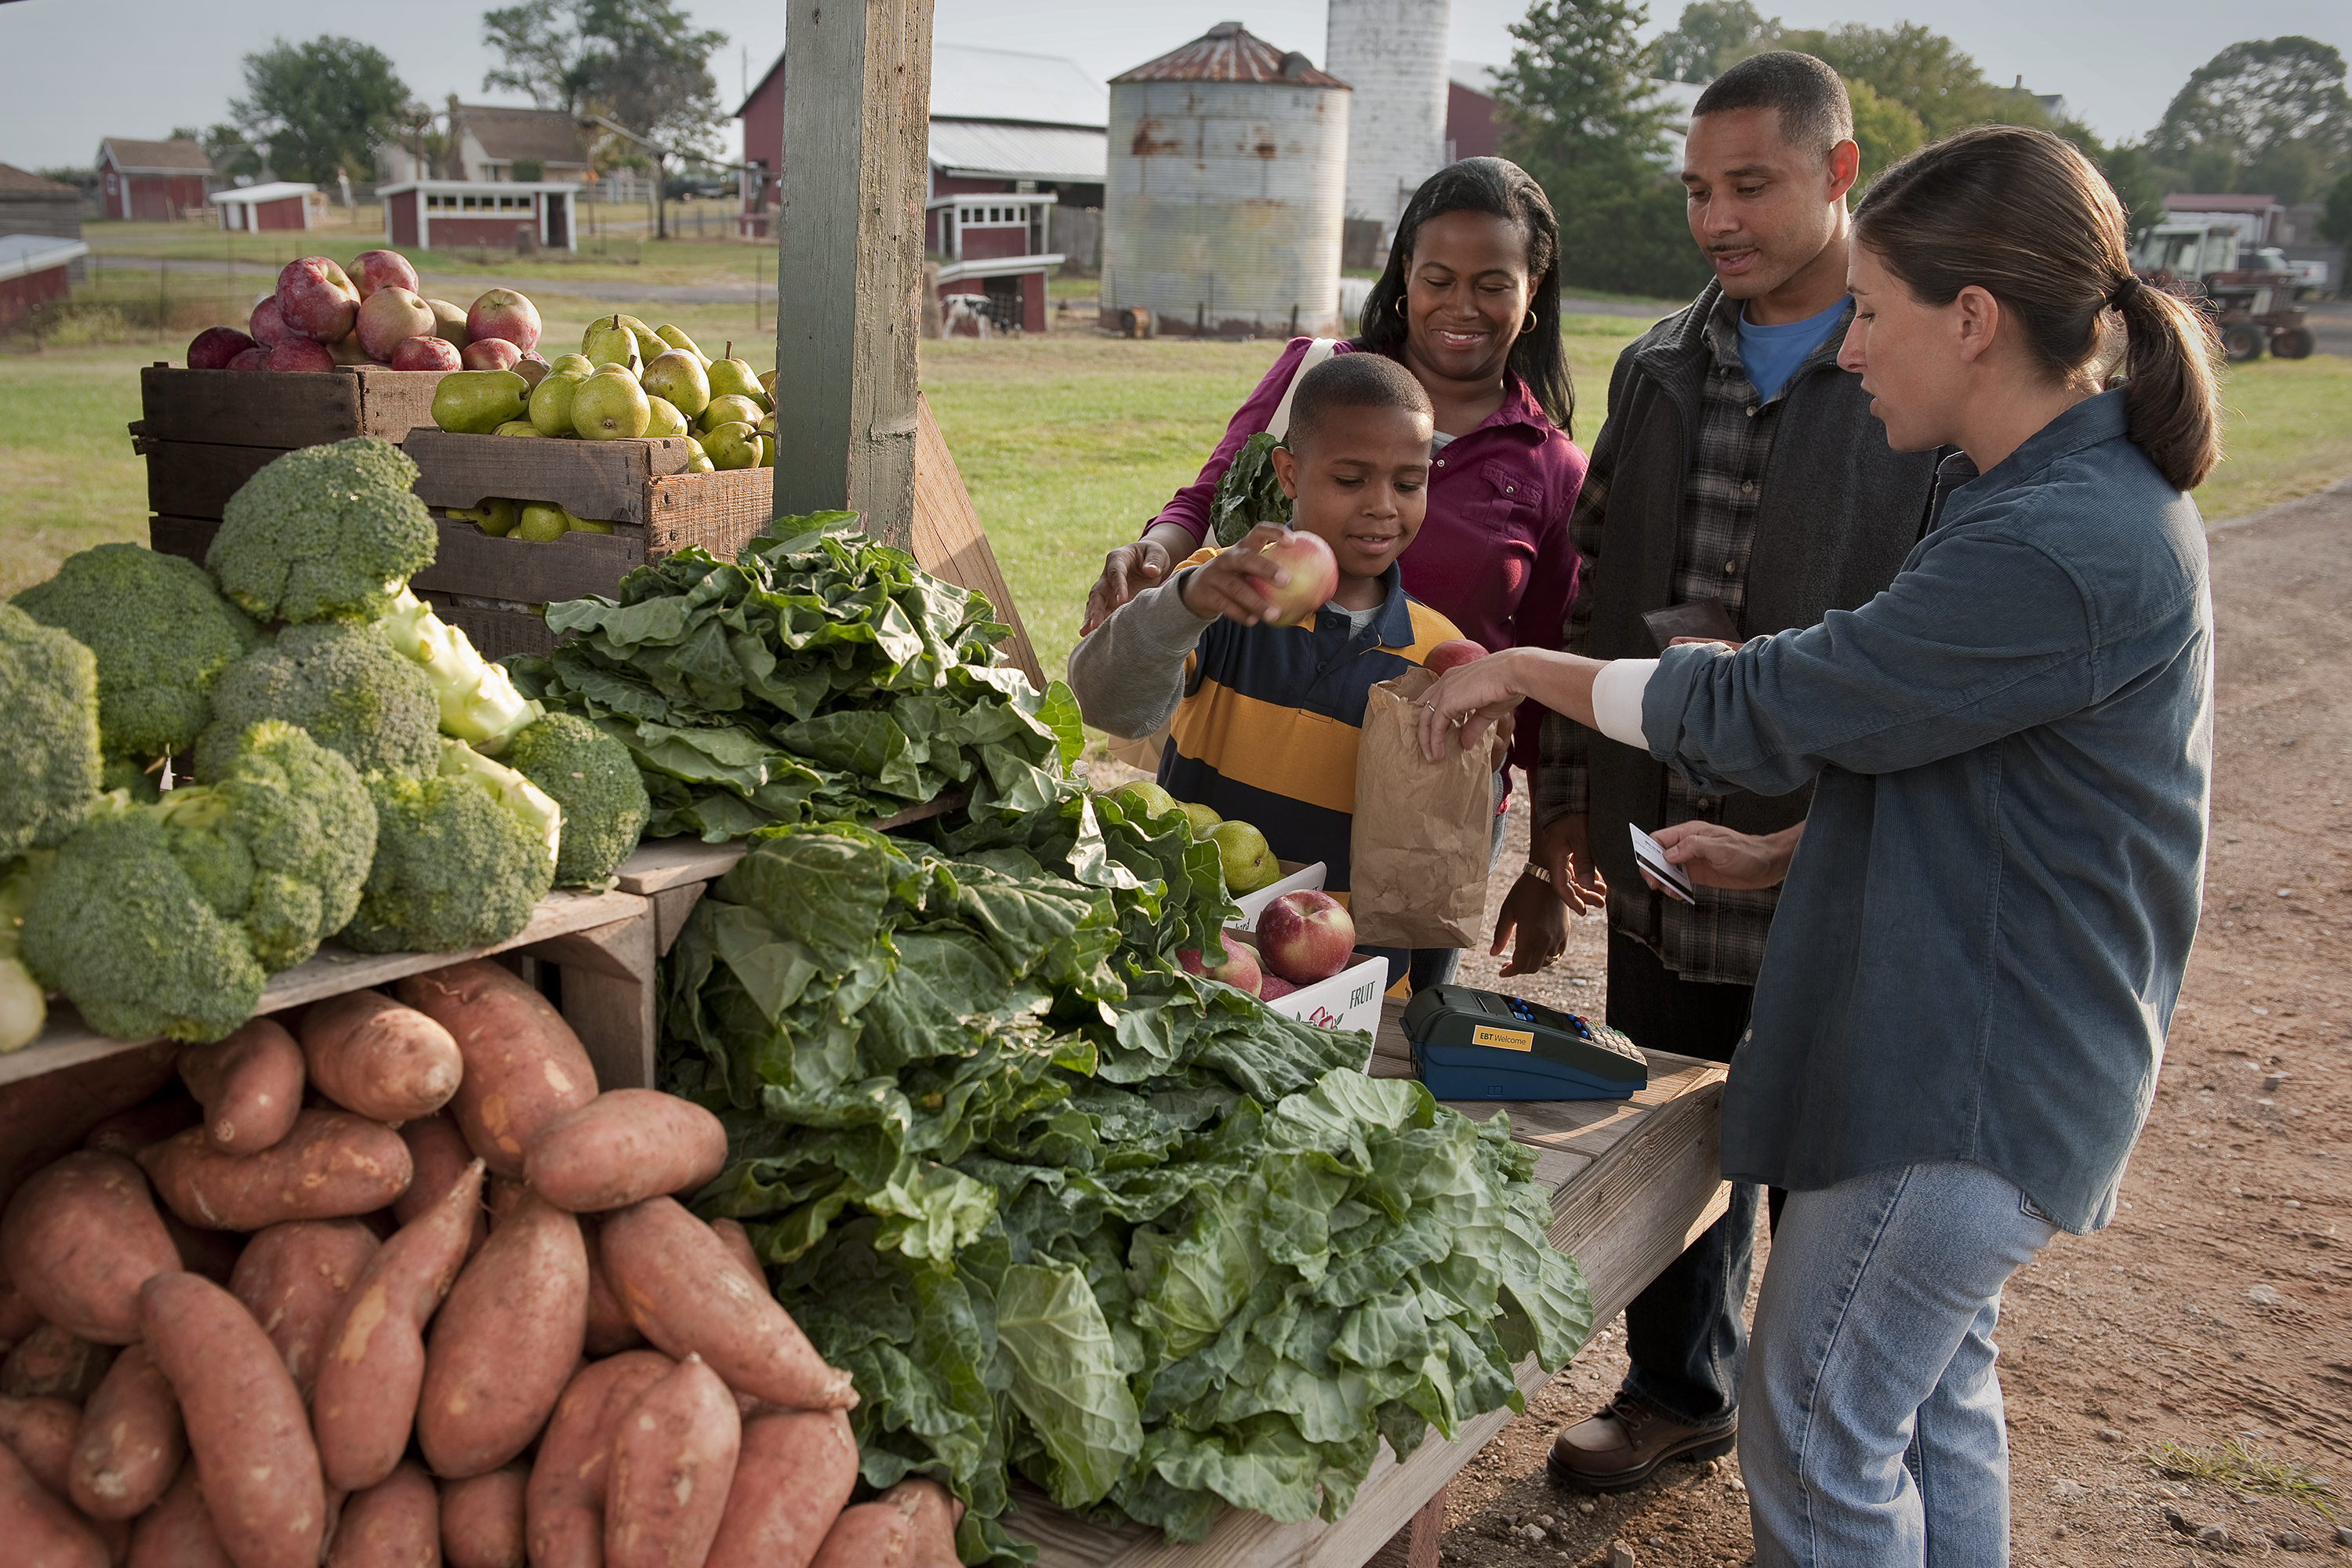 A family purchases produce from a farmers market vendor. (SNAP-Ed Photo Gallery, USDA)